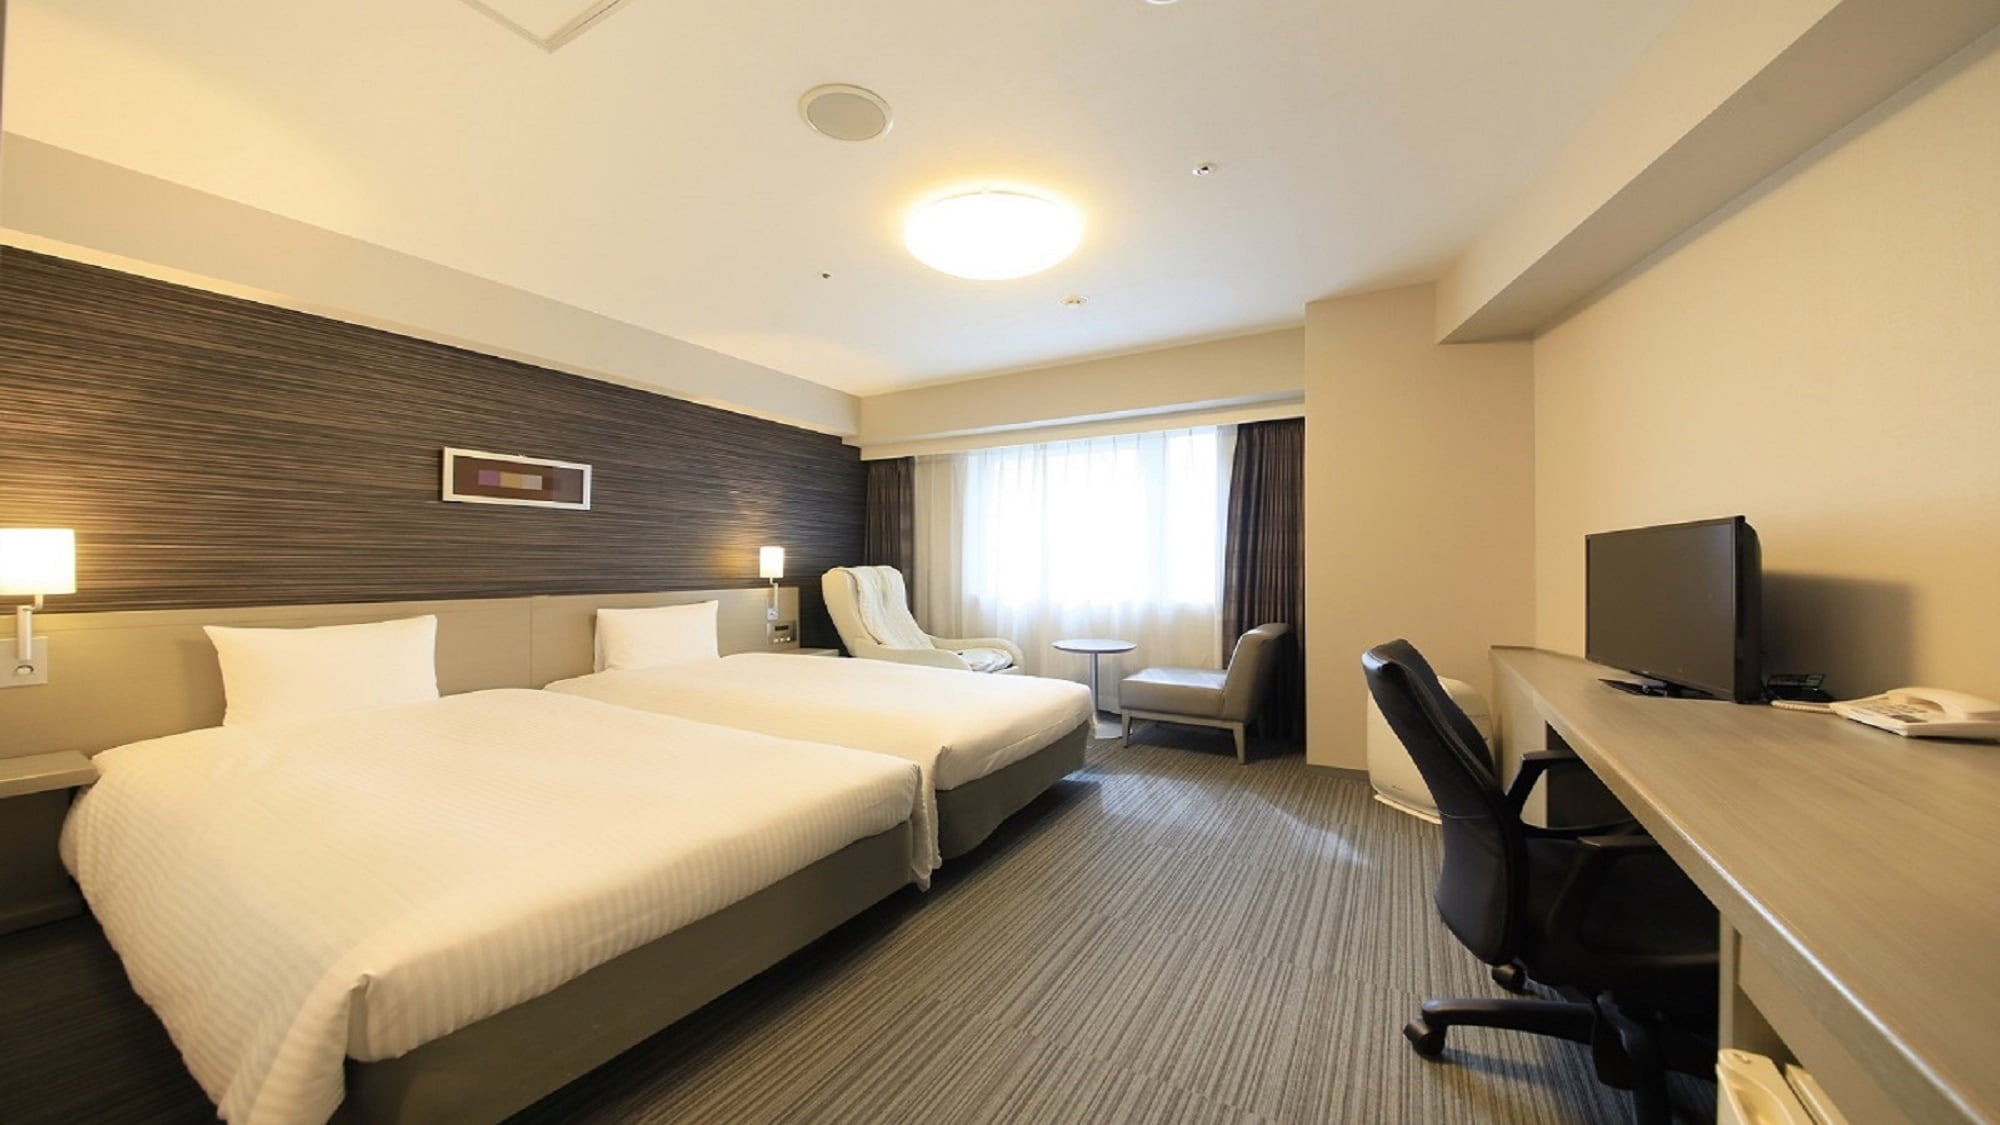 [Hollywood Twin Room] 27㎡ / 110cm wide 2 beds